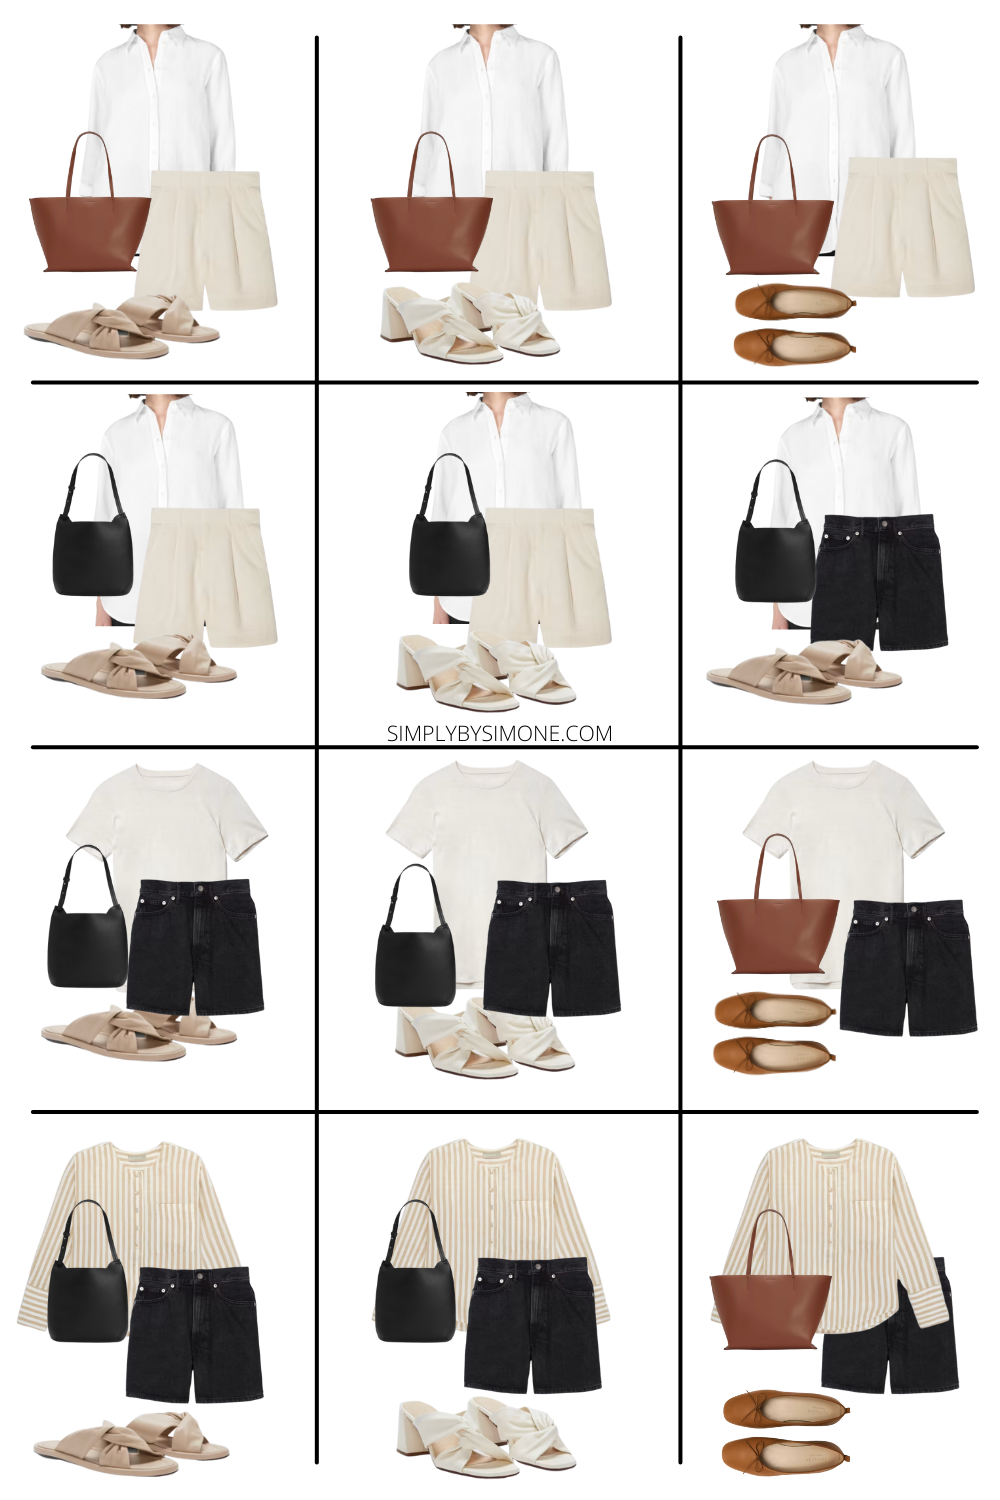 Affordable Everlane Summer Capsule Wardrobe | 12 Pieces, 48 Outfits | How to Build a Capsule Wardrobe | Everlane Summer Clothes | Outfit Inspiration | 48 Summer Weather Outfit Ideas | Summer Vacation Packing Guide | Everlane Summer Capsule Wardrobe - What To Wear This Summer 2023, European Outfit Ideas | Looks 13-24 | Simply by Simone